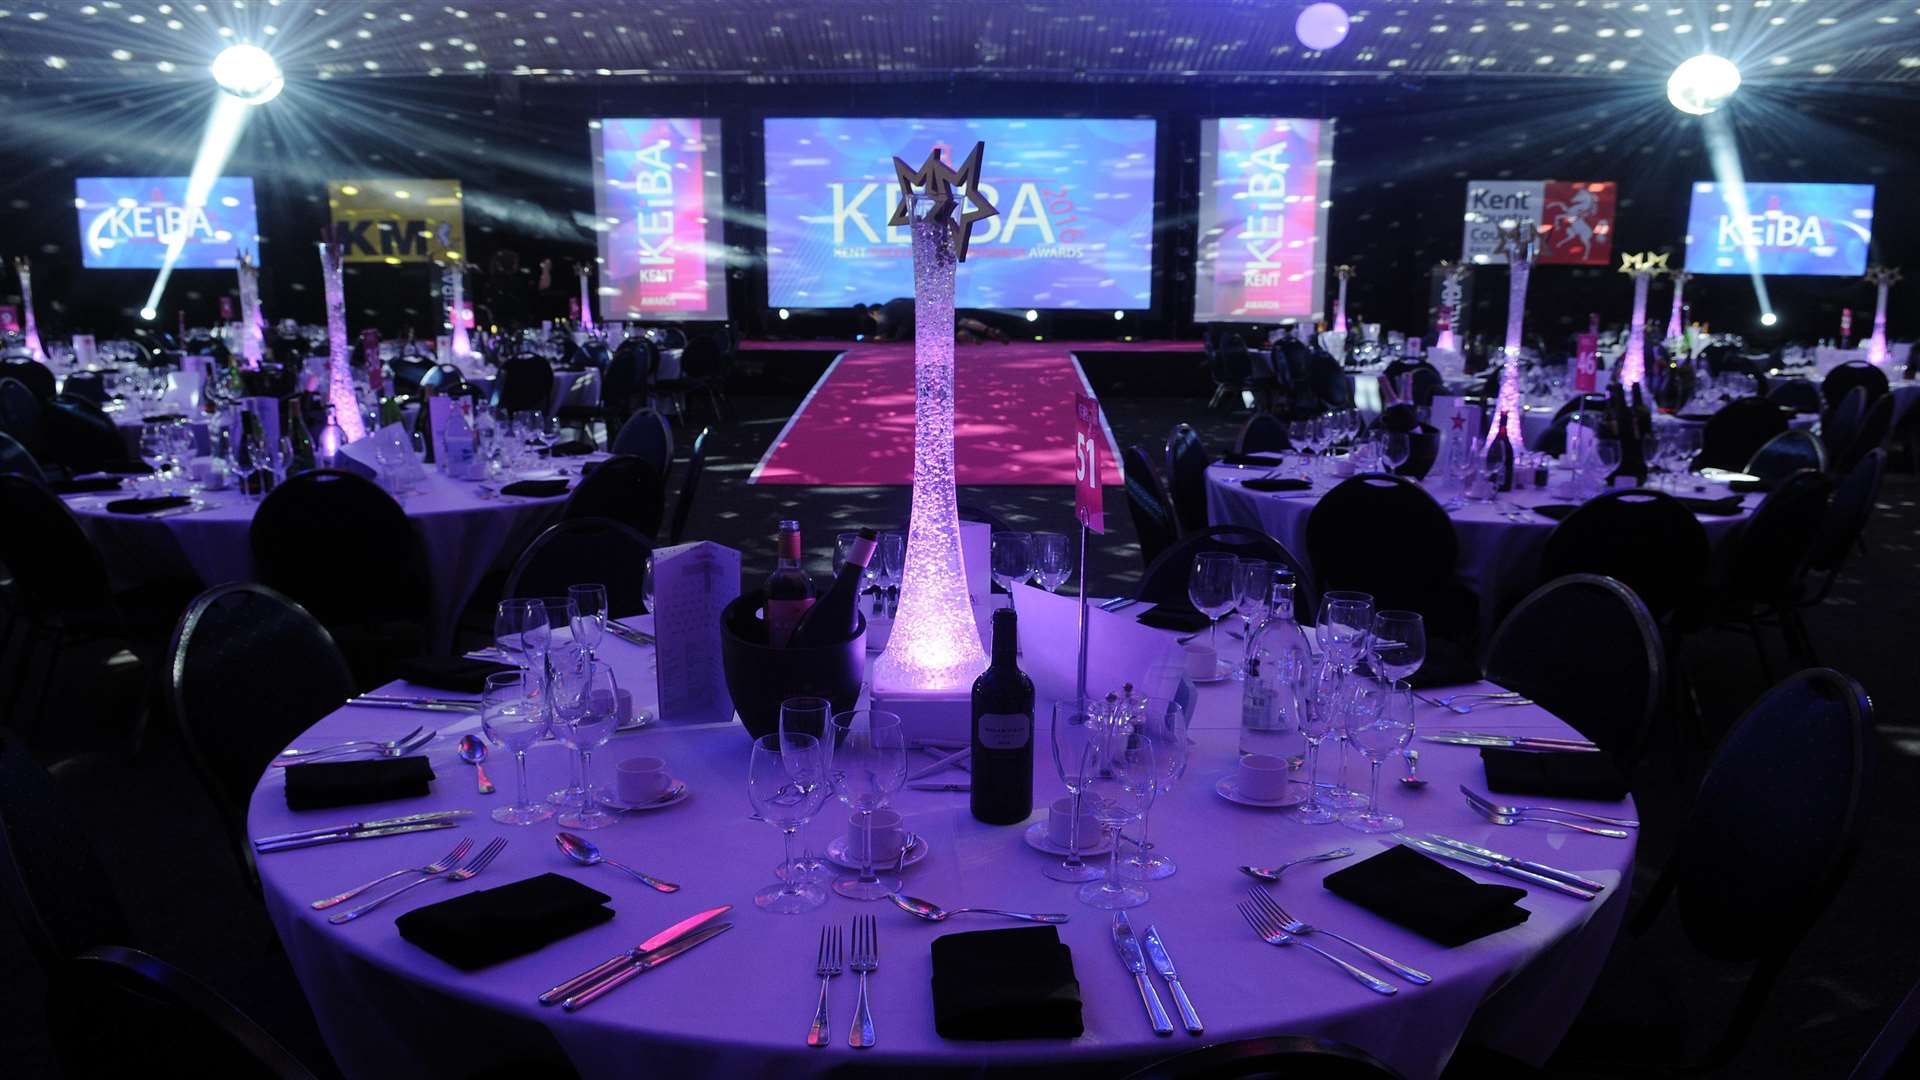 There will be 17 awards presented at KEiBA 2017